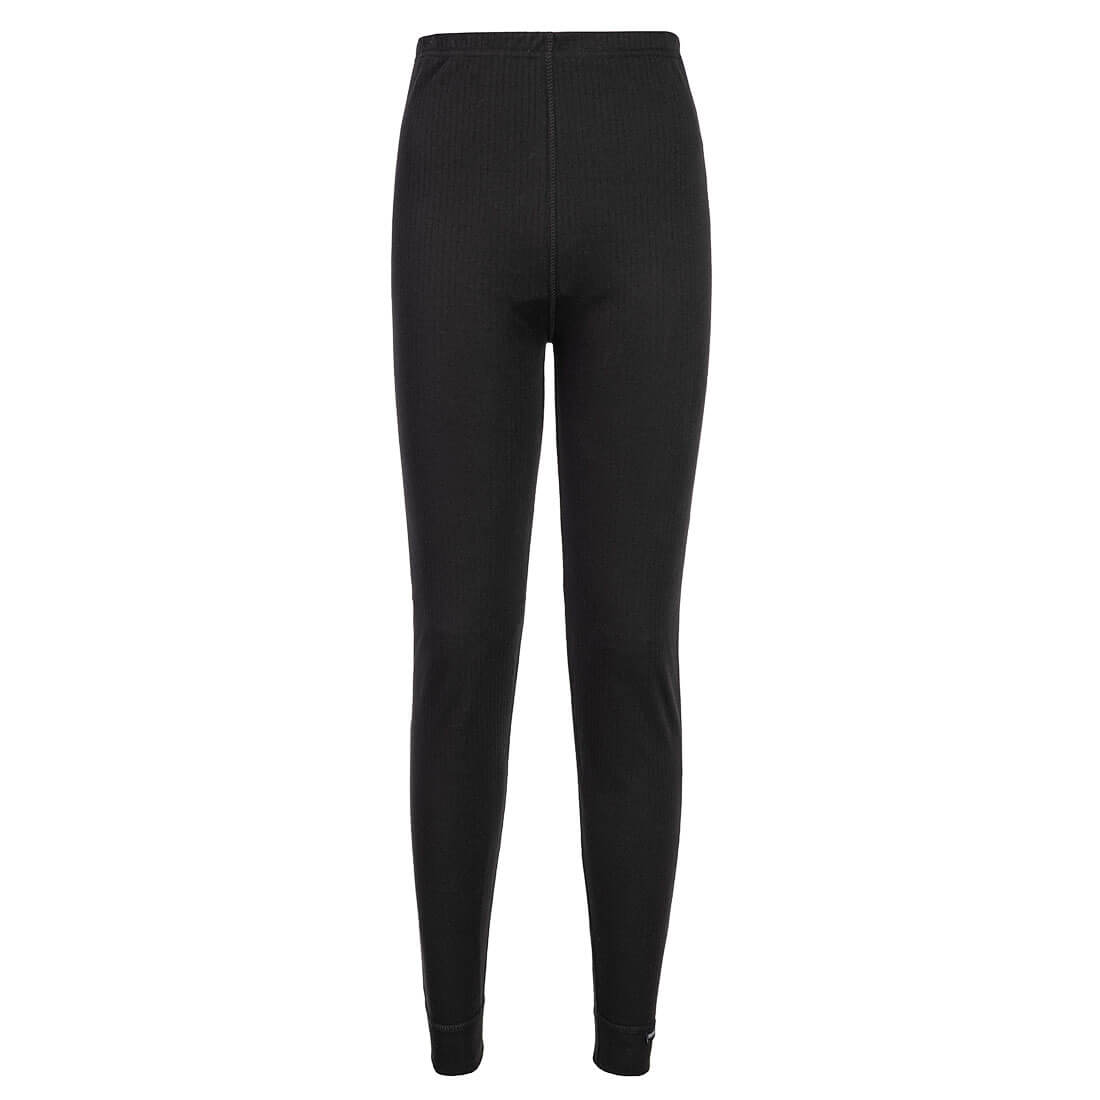 Portwest B125 Women's Thermal Trousers for Baselayer